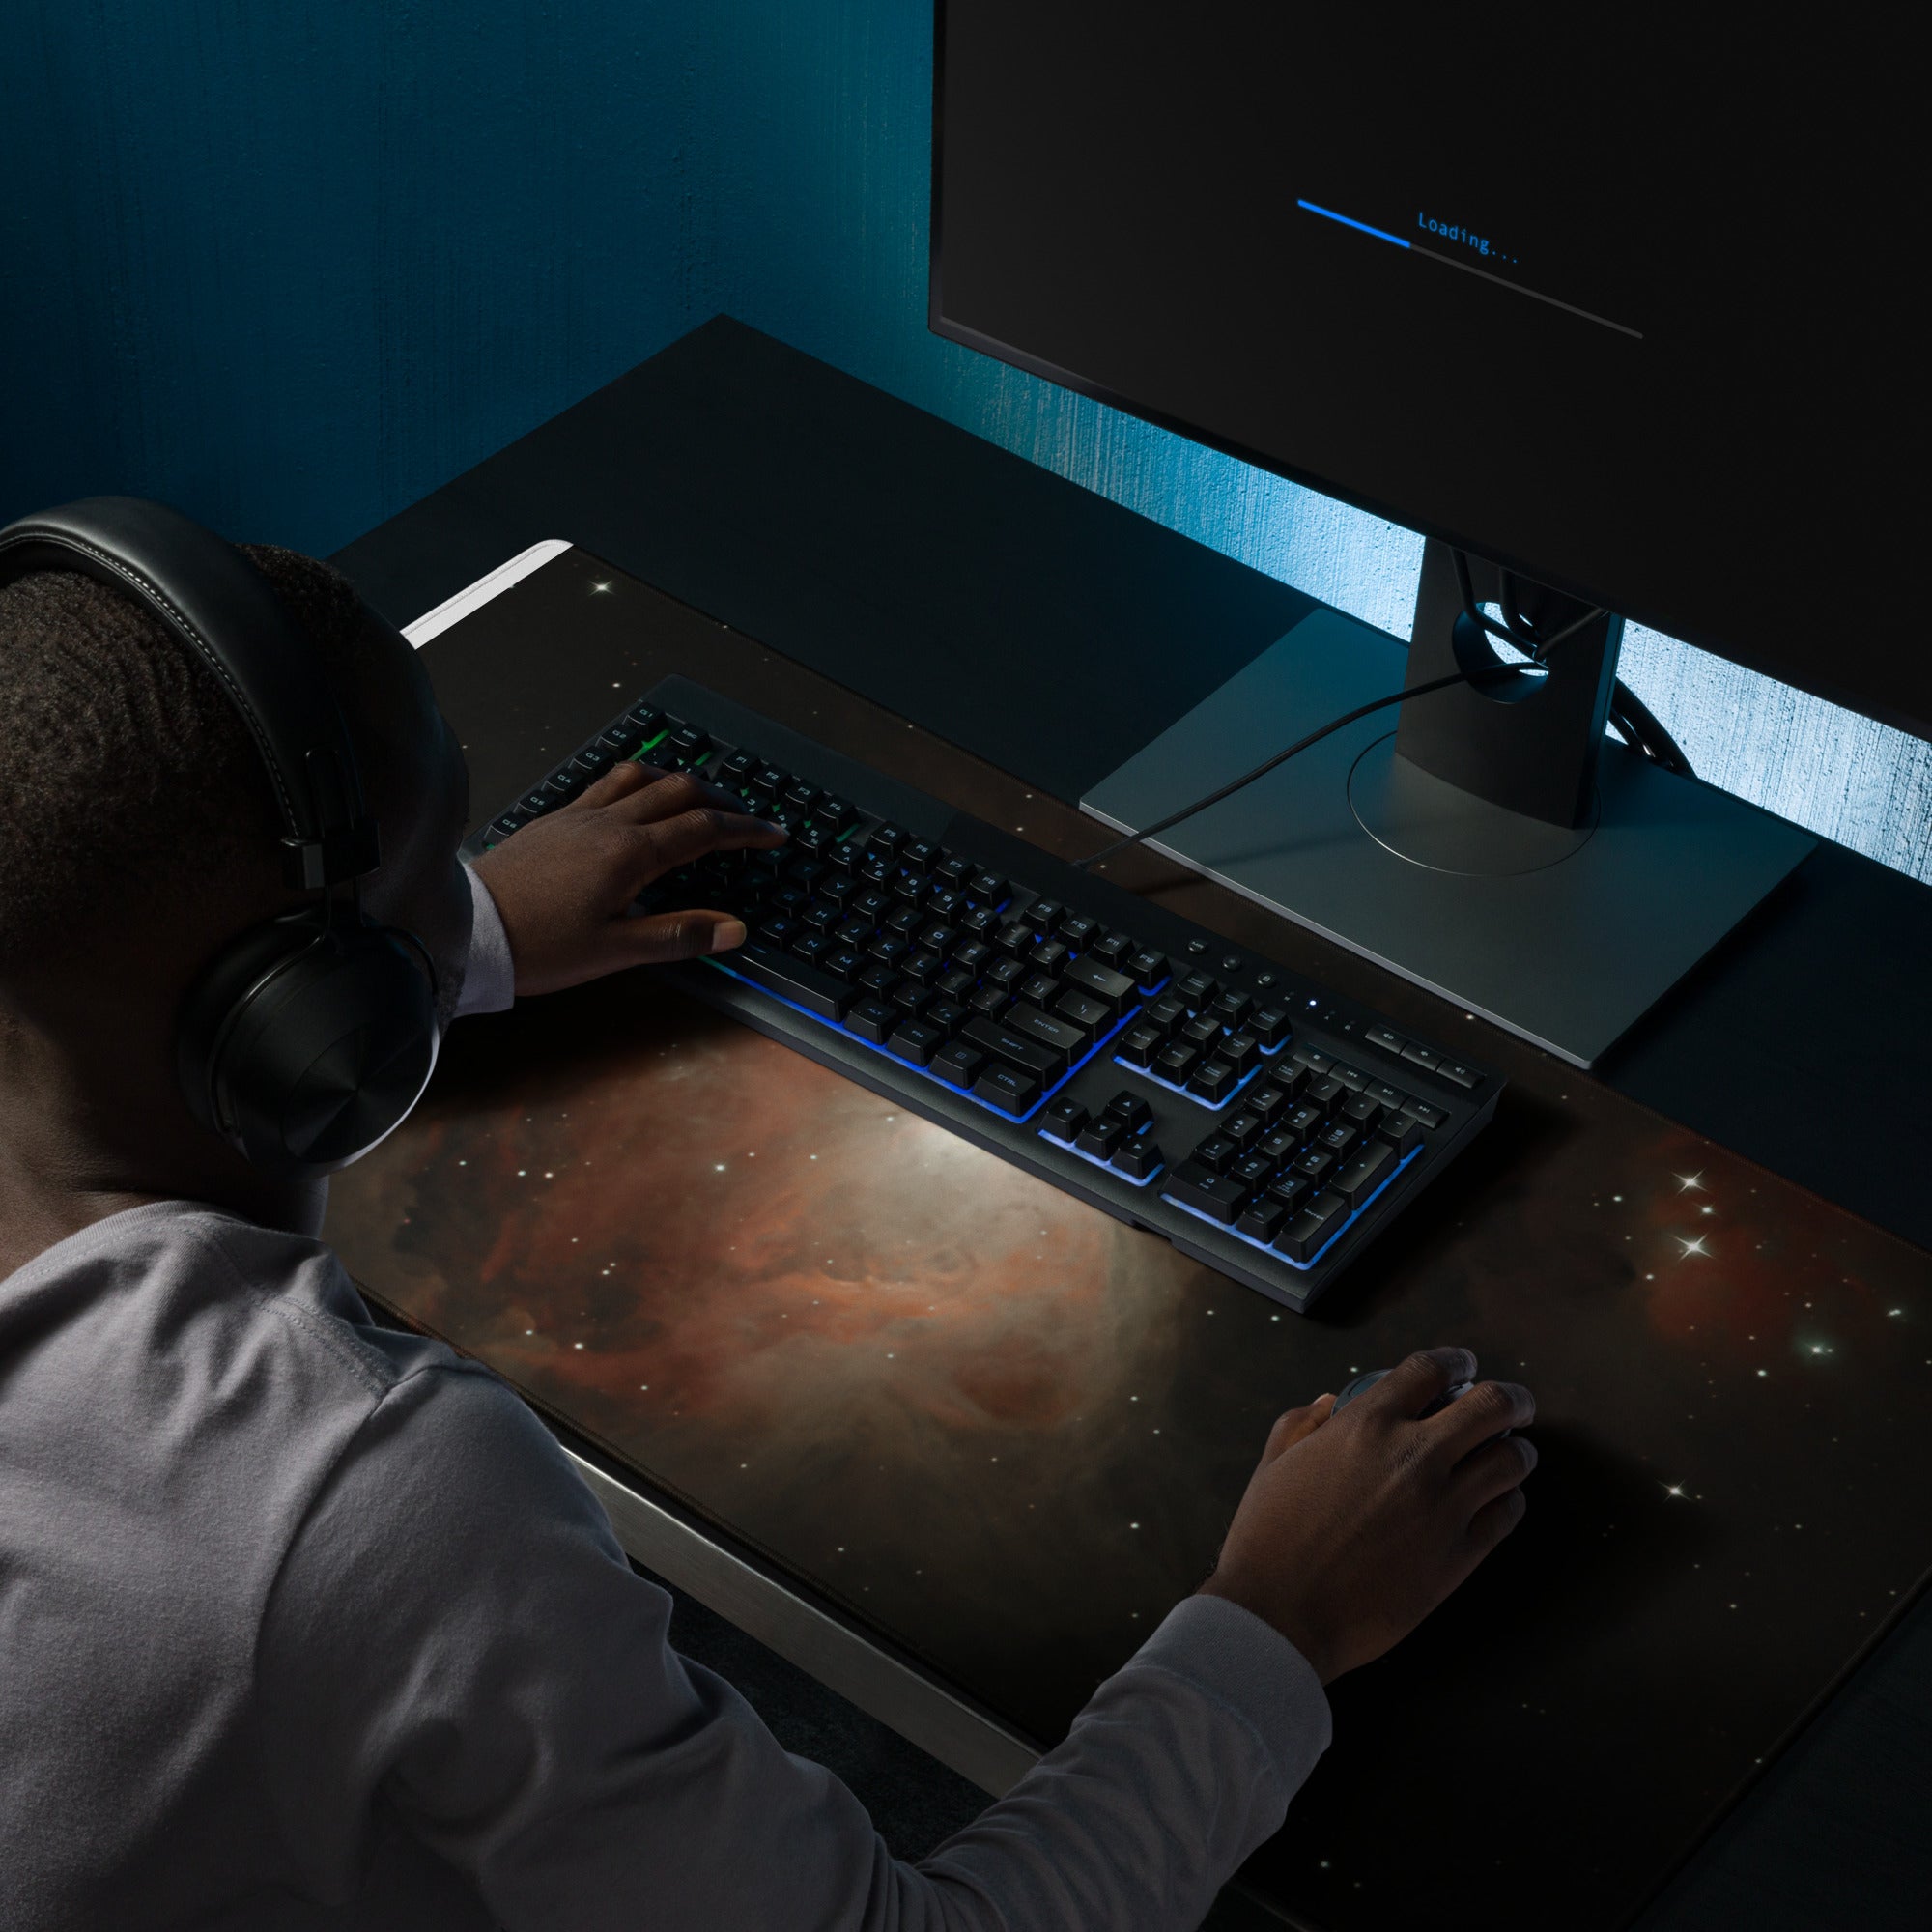 Gaming mouse pad:  The Great Orion Nebula